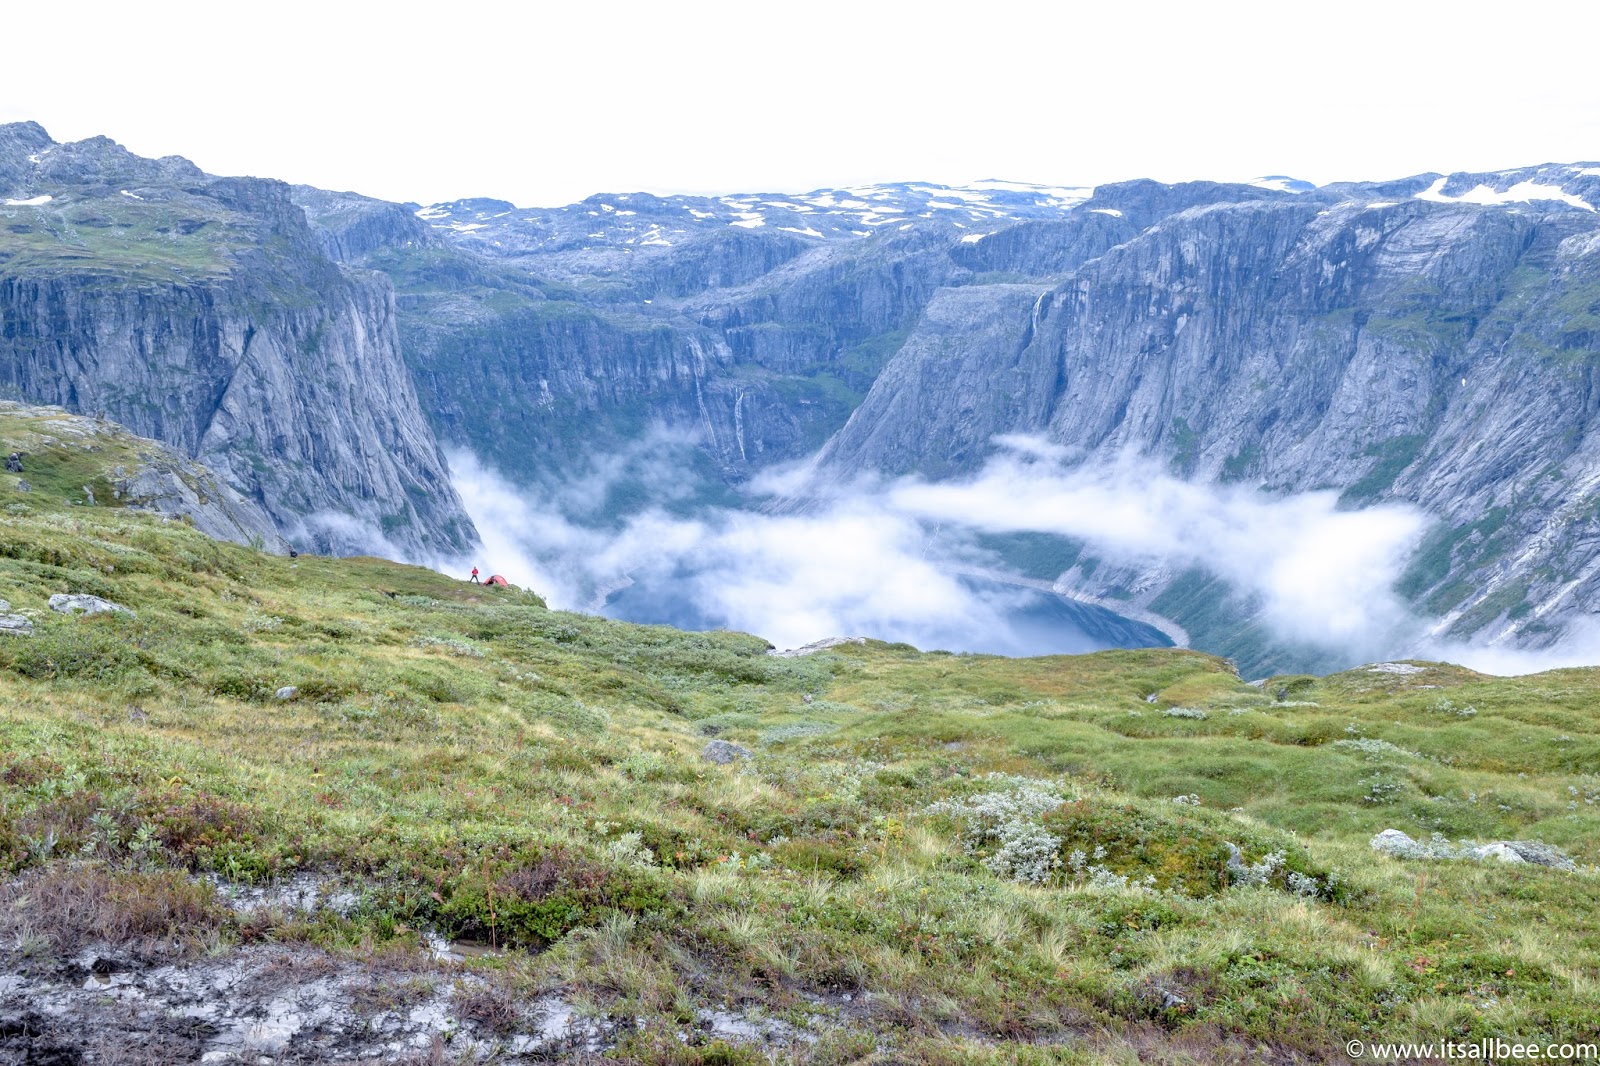 Trolltunga Hike Guide - Your Questions Answered!